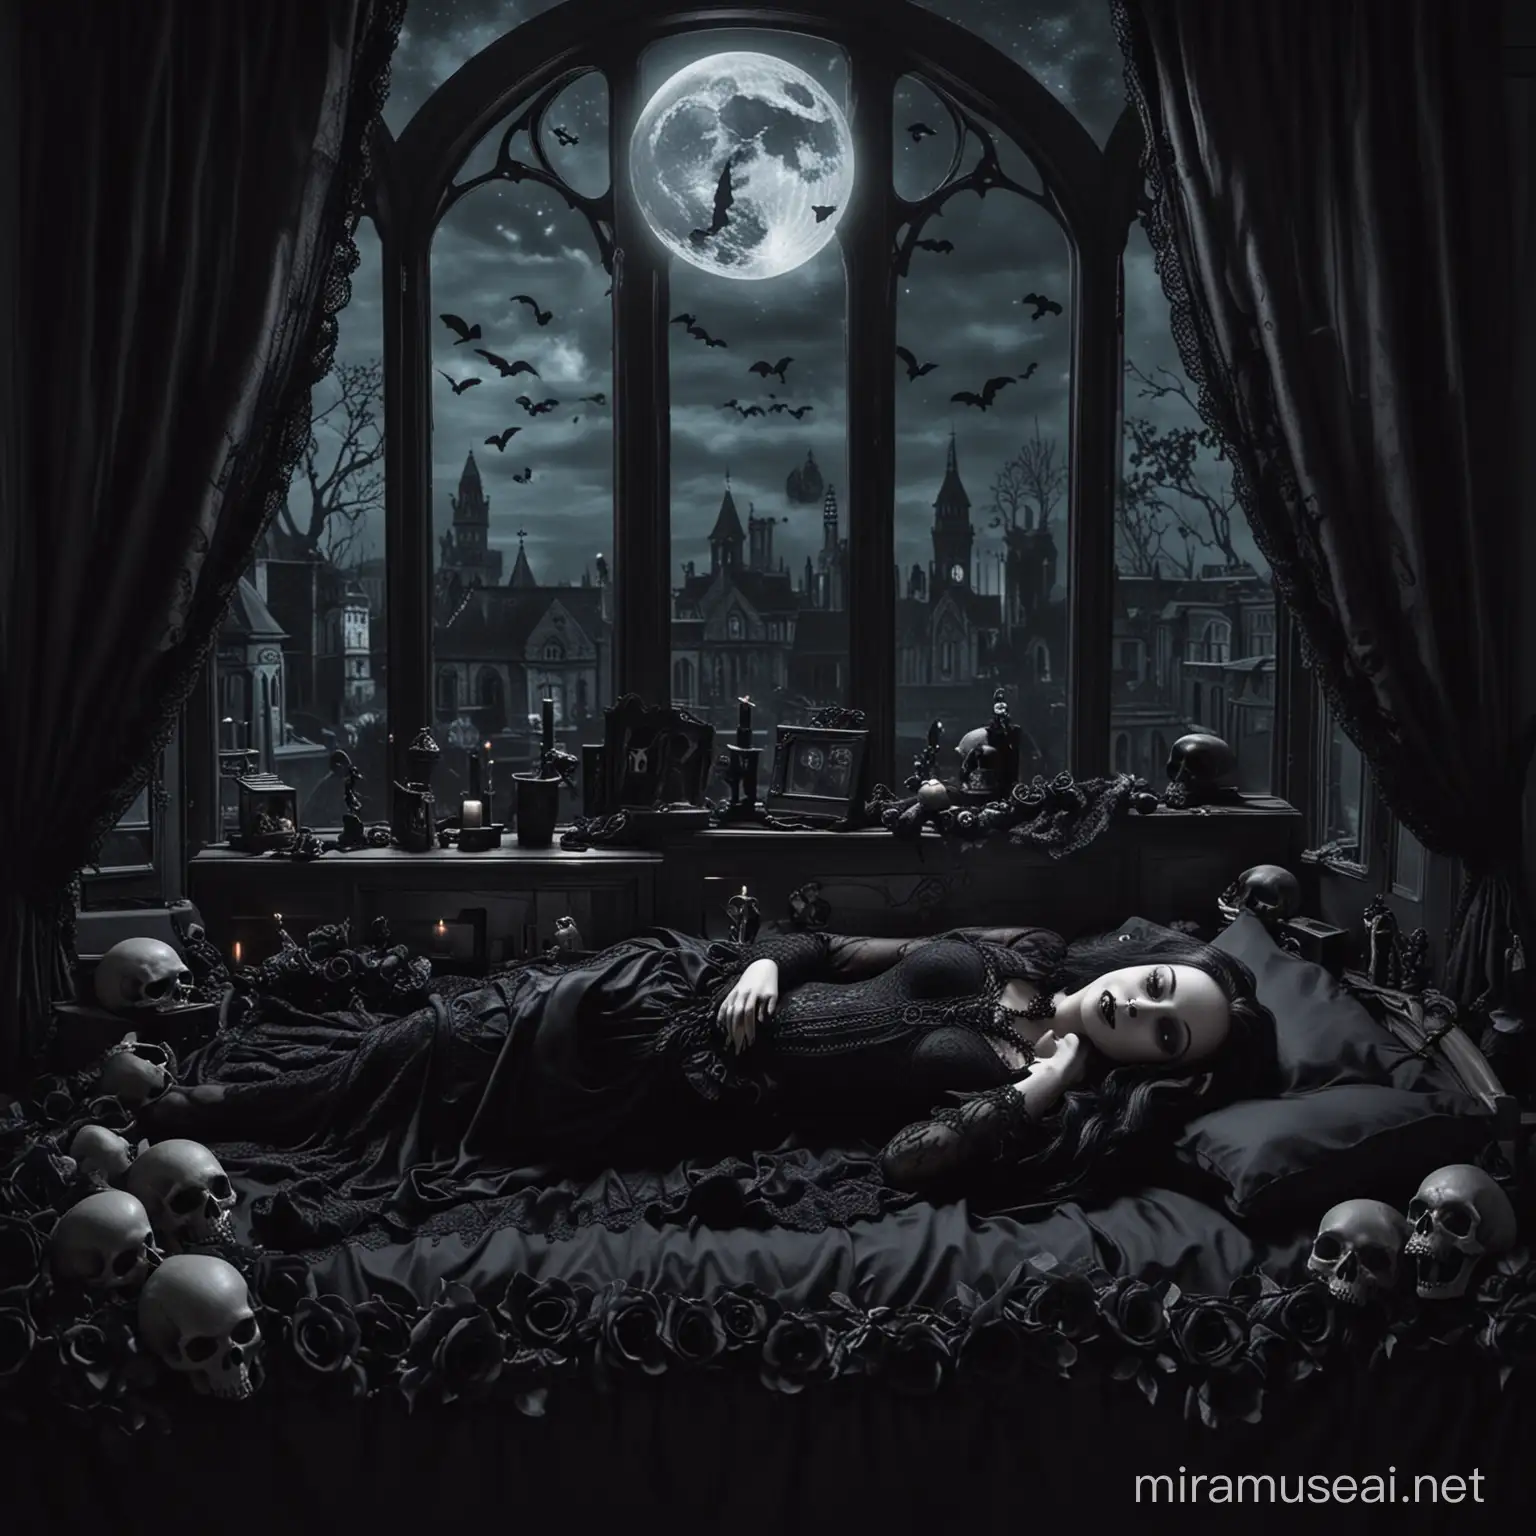 Seductive Gothic Beauty Morticia in Black Baby Dolls on Moonlit Bed